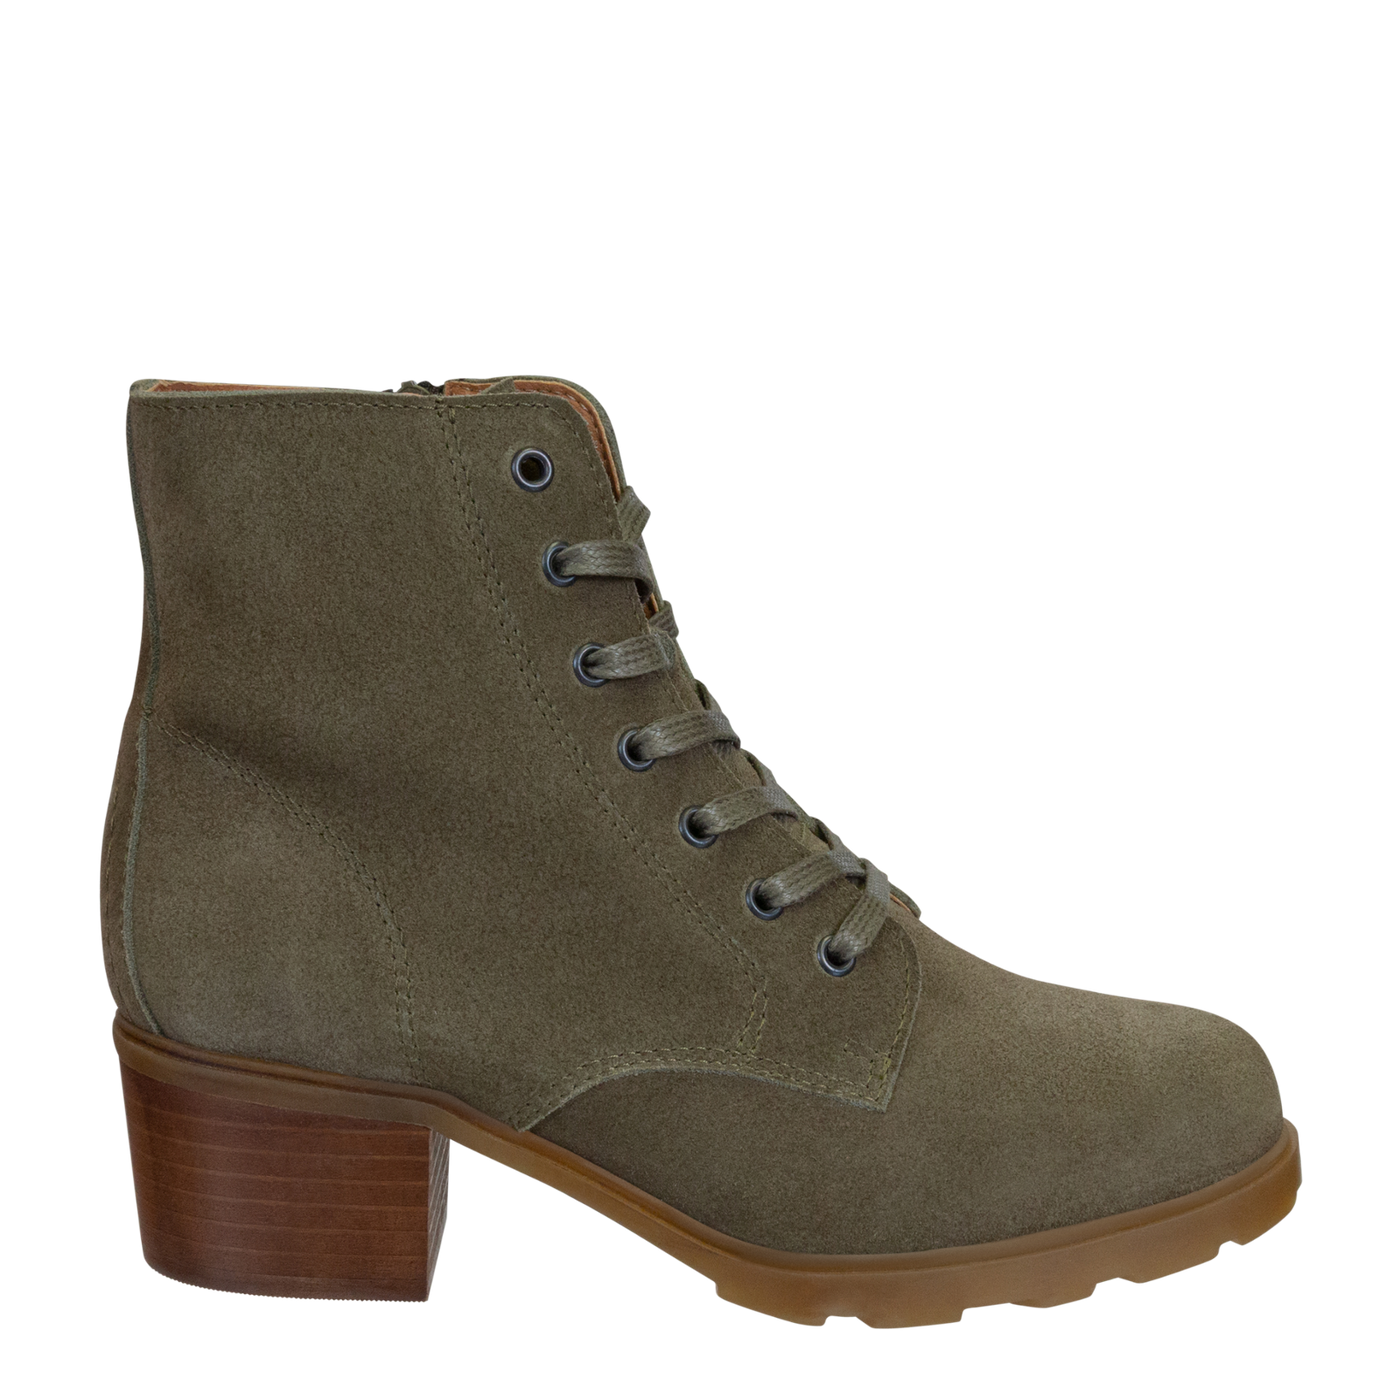 OTBT - ARC in ELMWOOD Heeled Ankle Boots